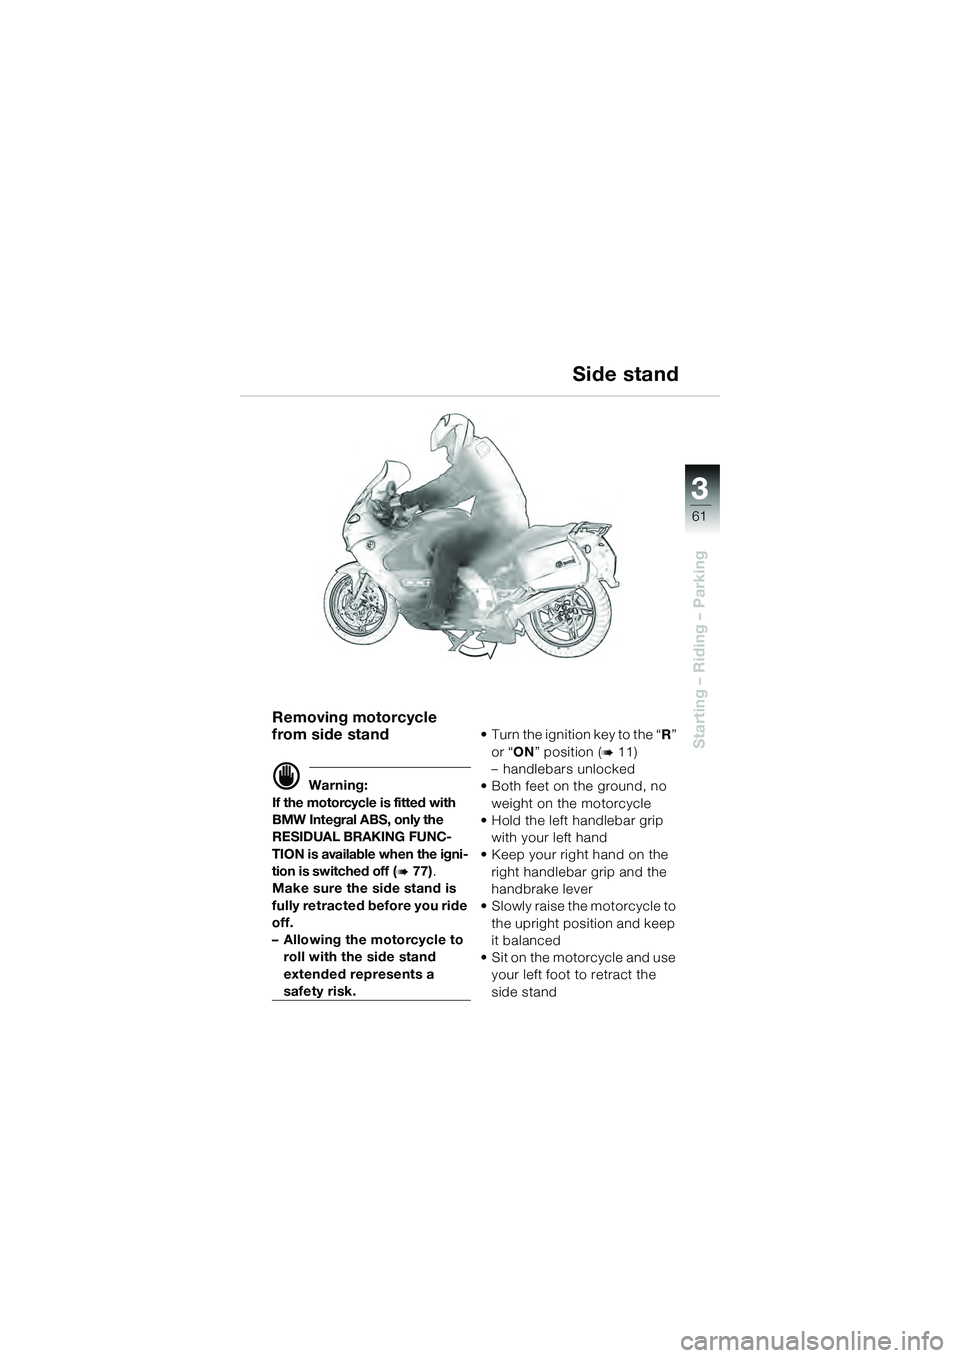 BMW MOTORRAD K 1200 GT 2004  Riders Manual (in English) 3
61
Starting – Riding – Parking
Removing motorcycle 
from side stand
 Warning:
If the motorcycle is fitted with 
BMW Integral ABS, only the 
RESIDUAL BRAKING FUNC-
TION is available when the ign